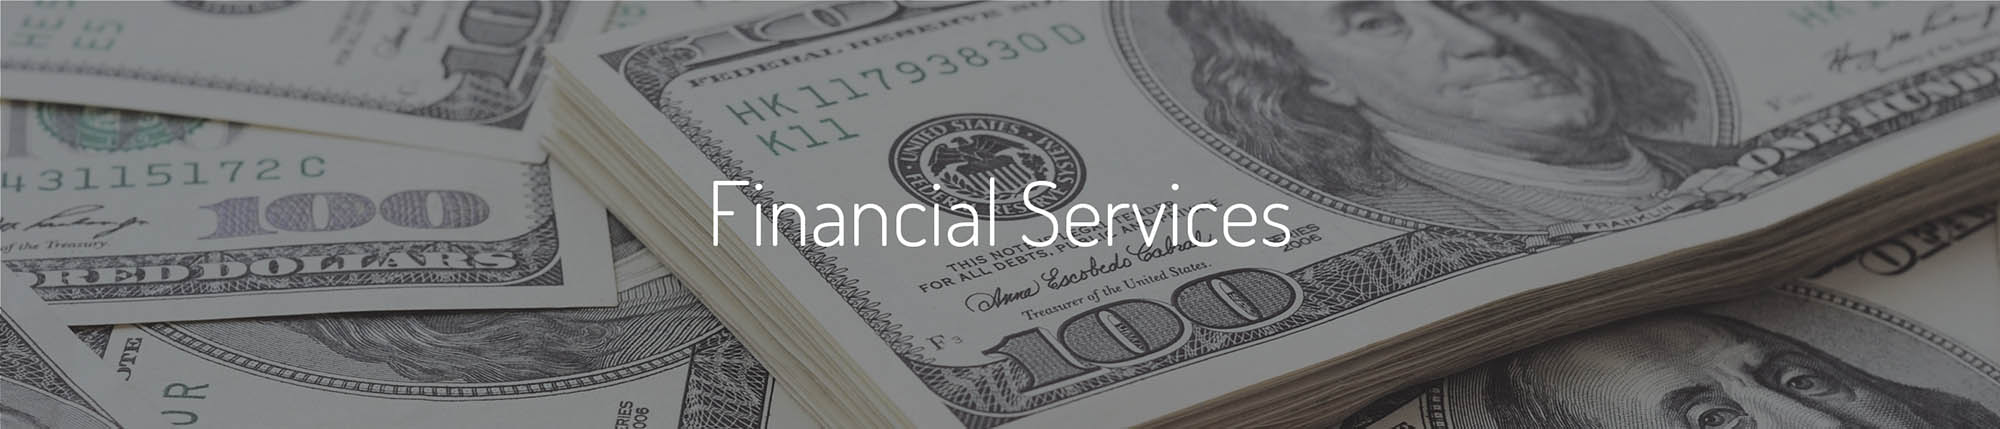 Main Image - Financial Services